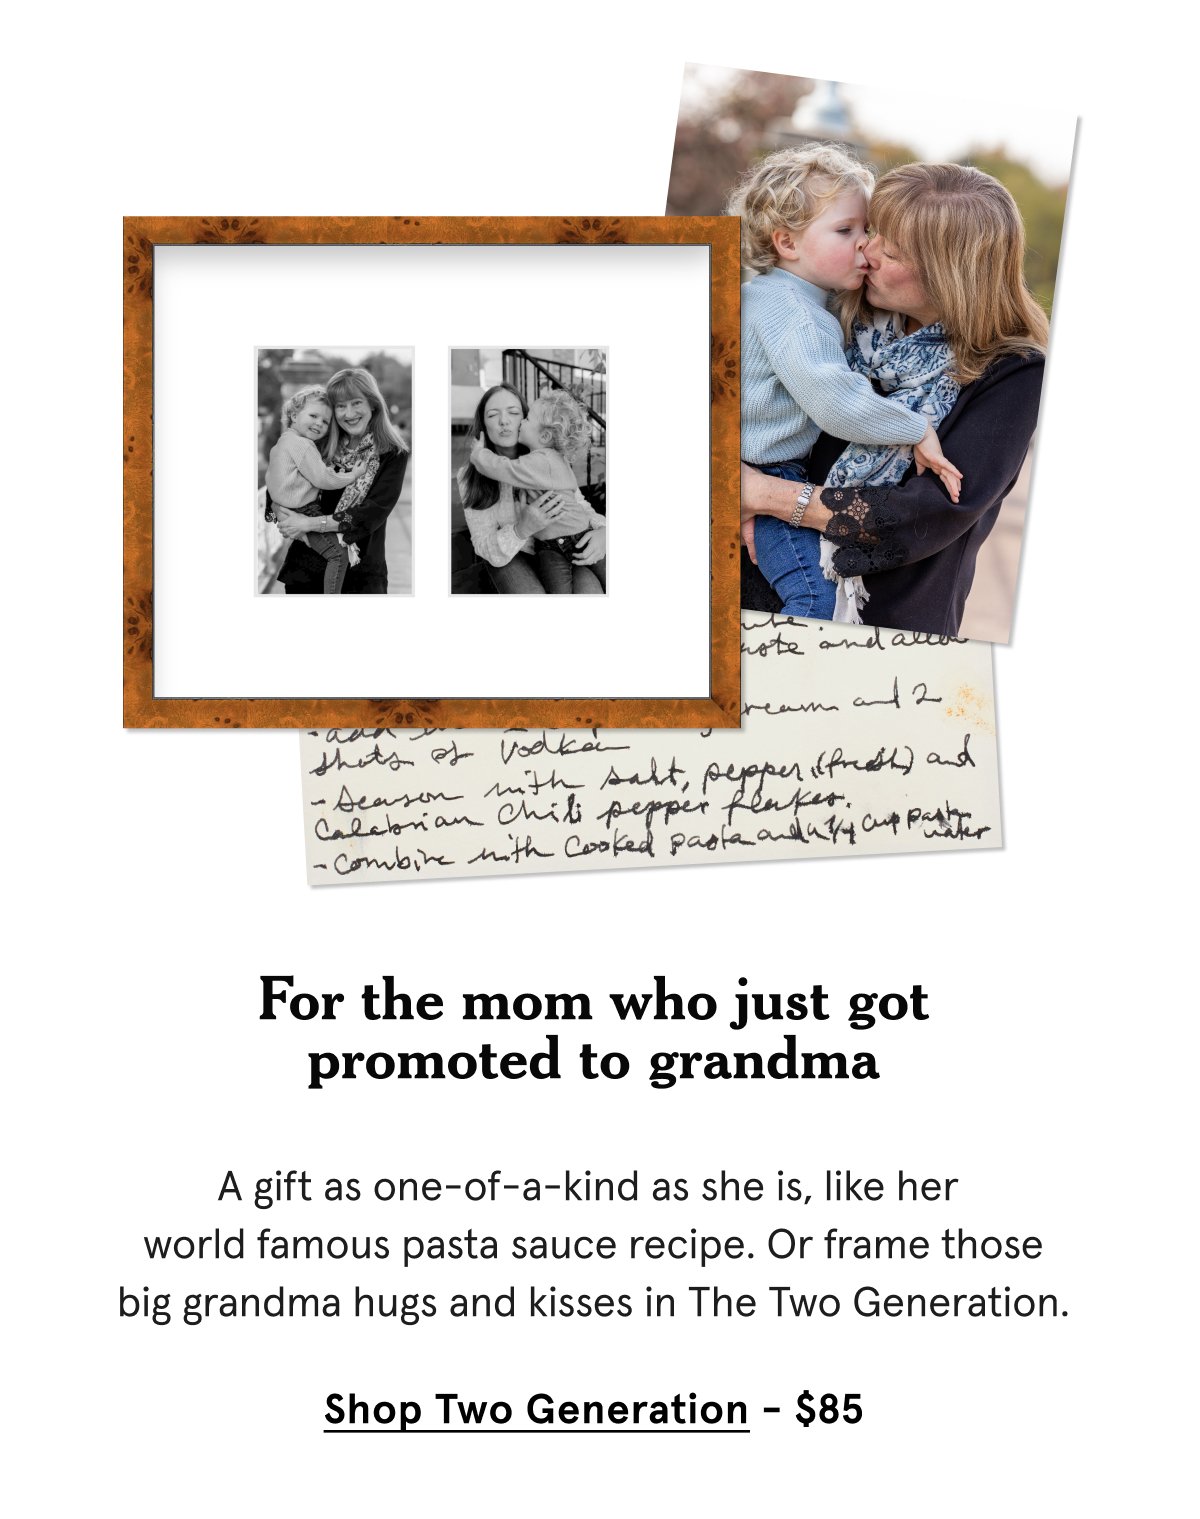 A gift as one-of-a-kind as she is, like her world famous pasta sauce recipe. Or frame those big grandma hugs and kisses in The Two Generation.